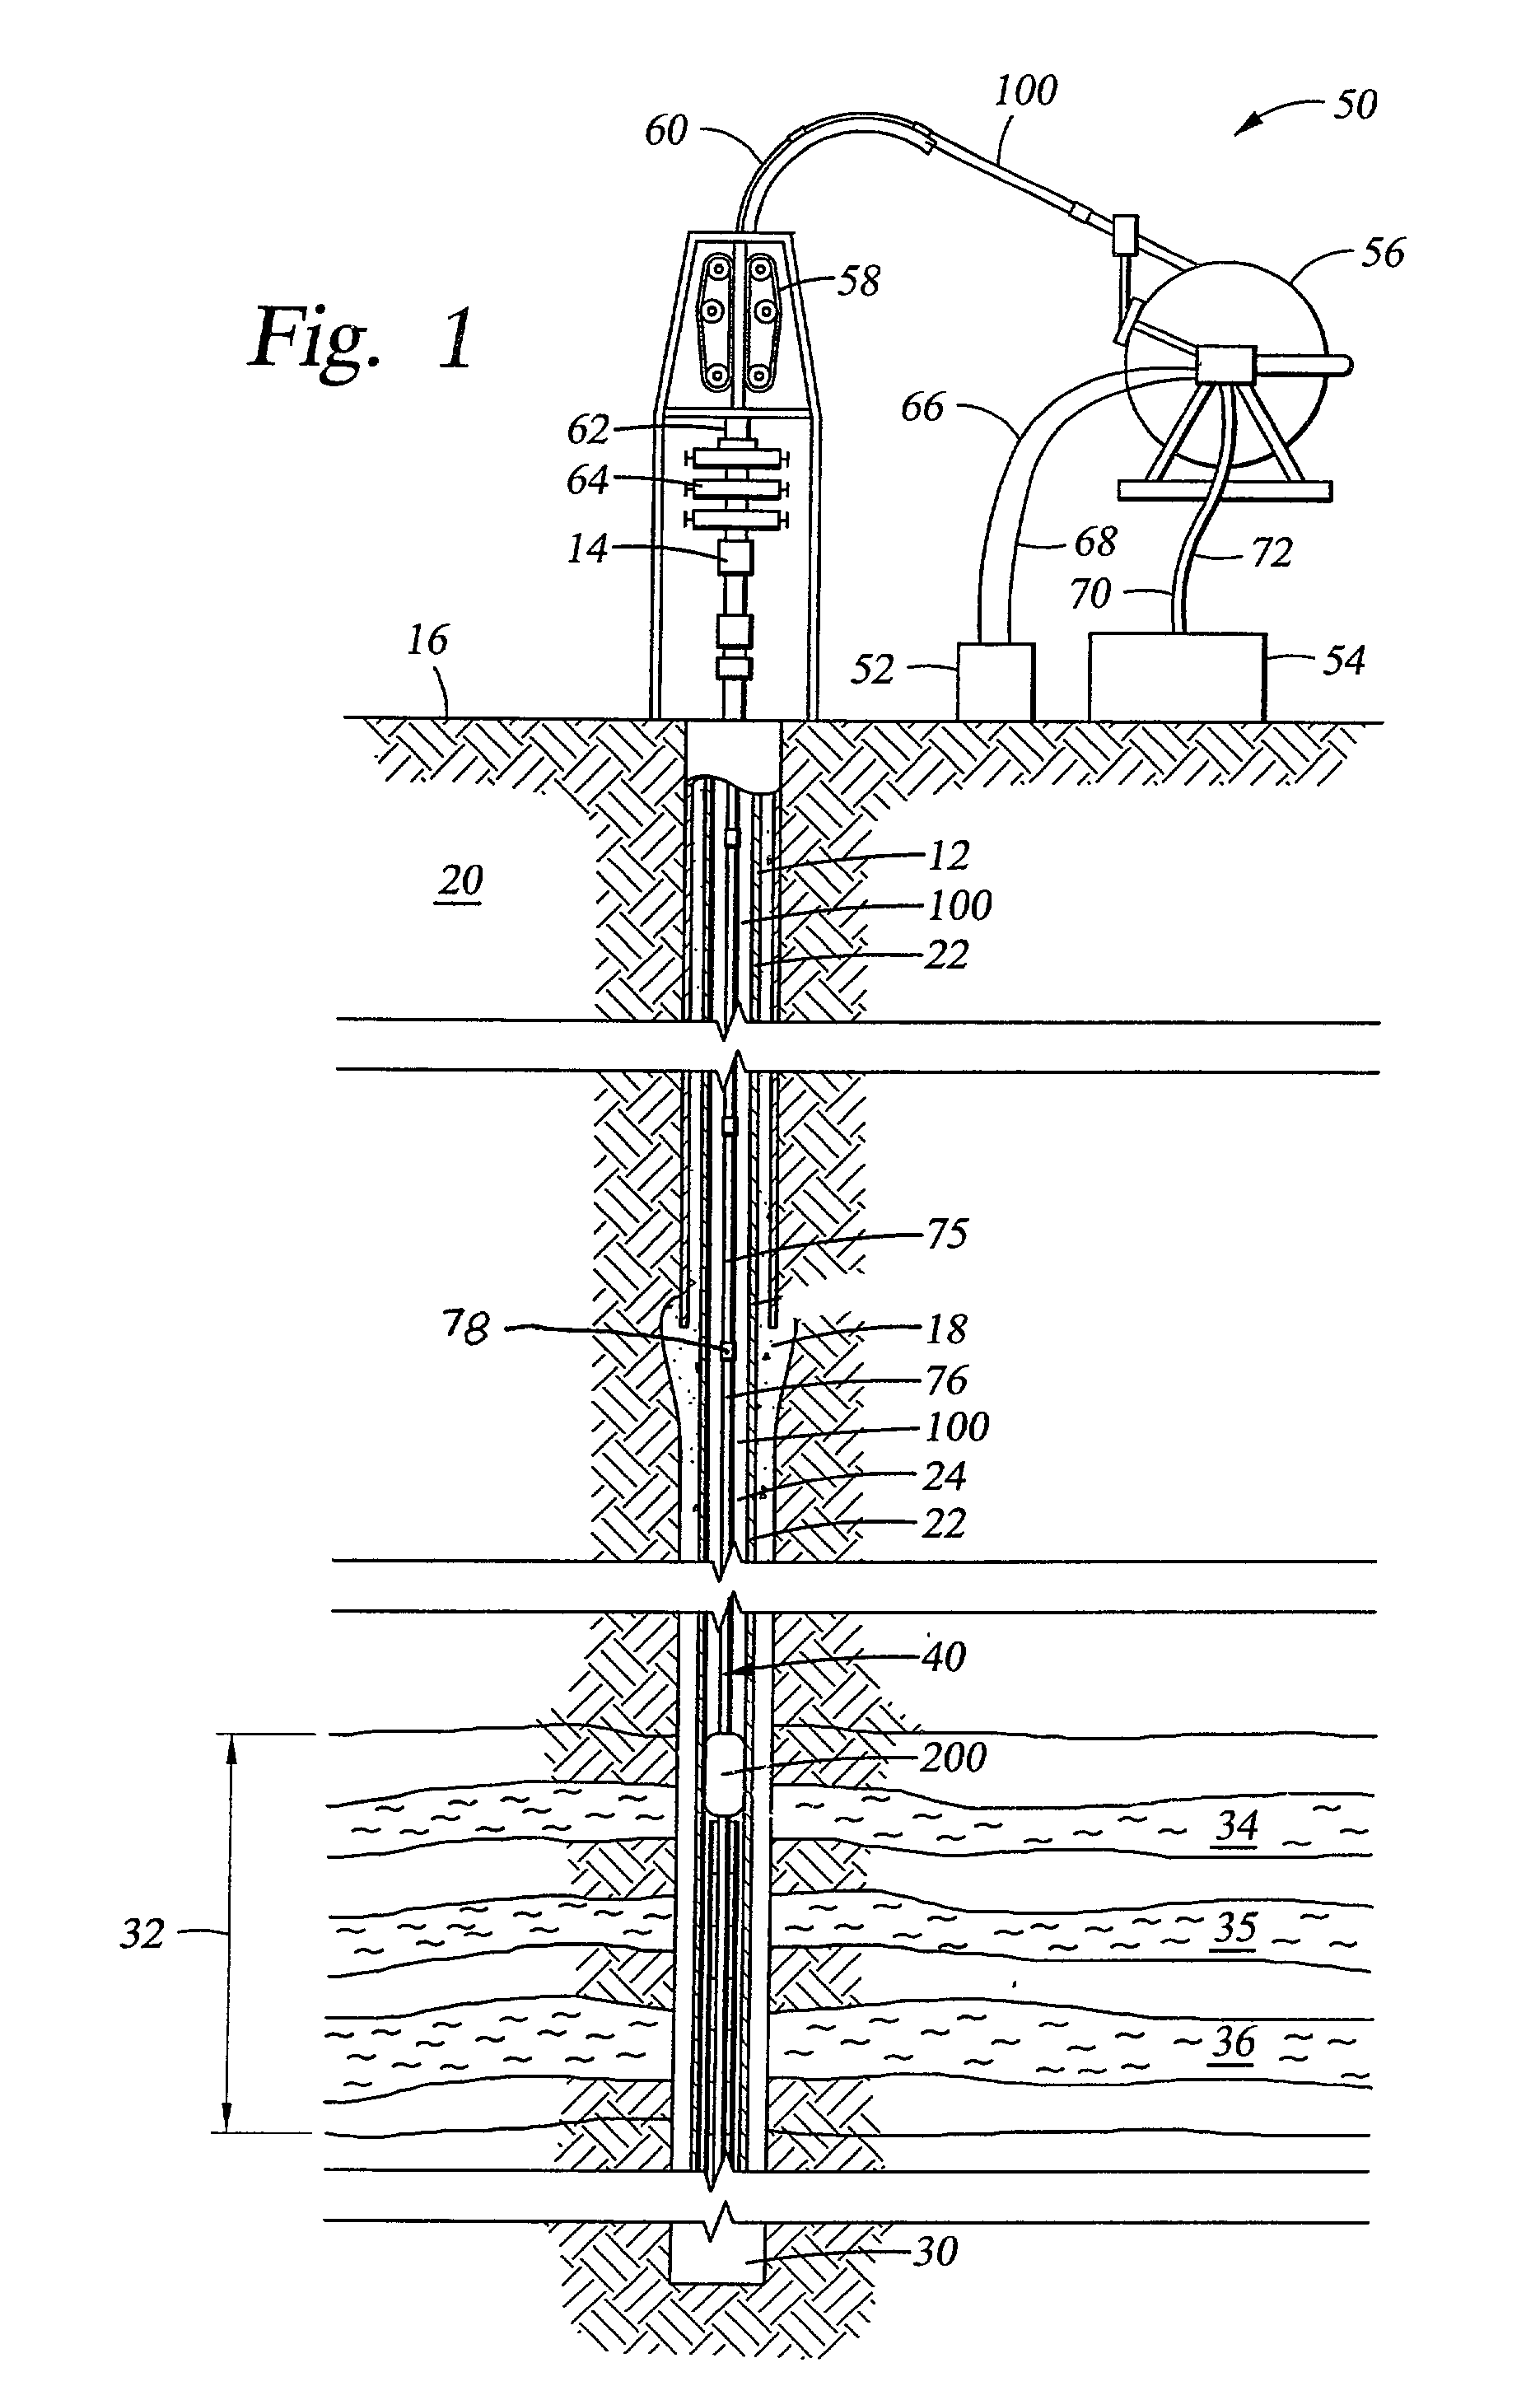 Well treatment apparatus and method